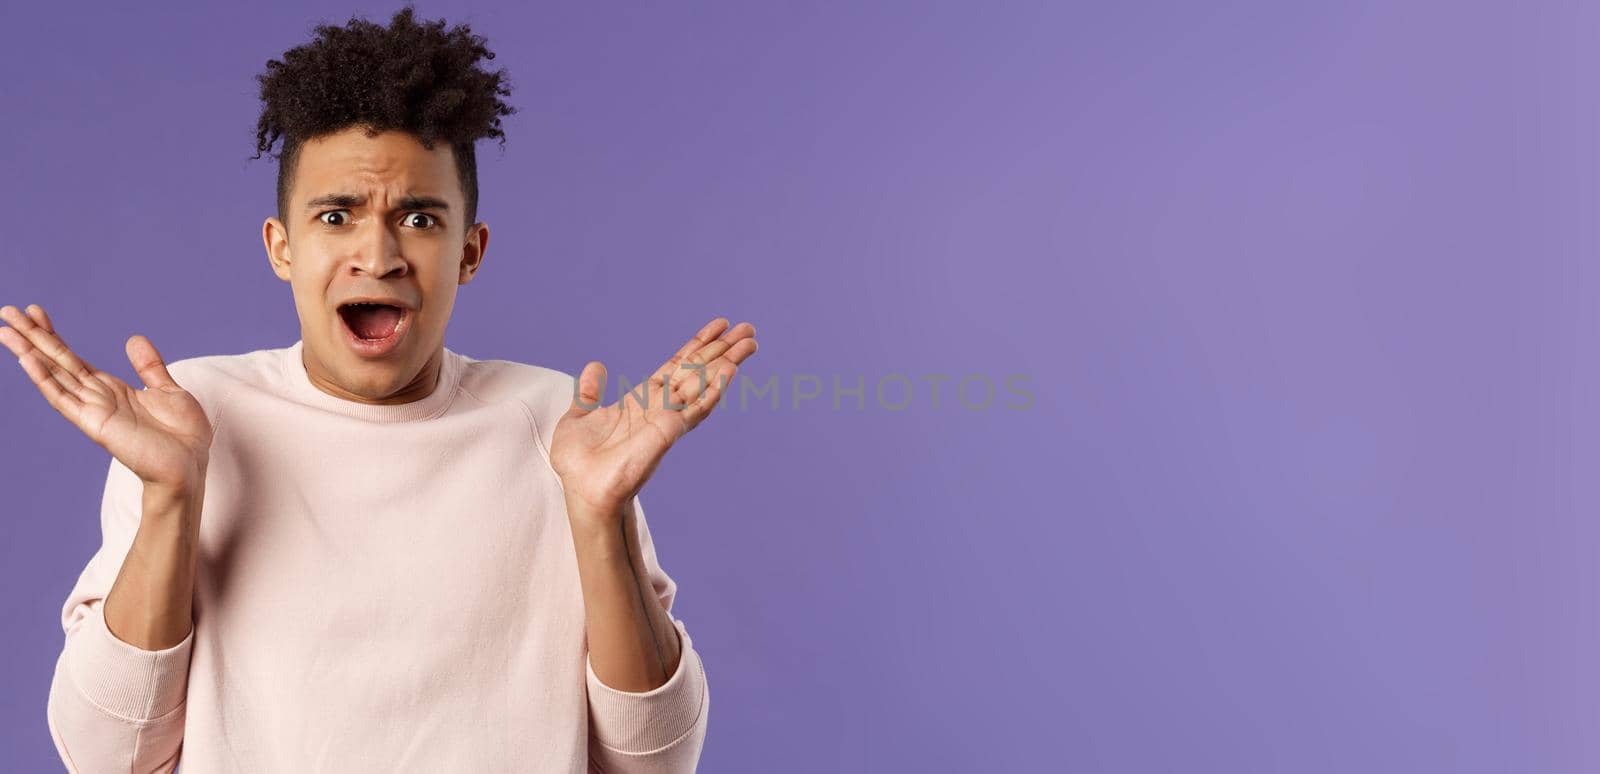 Close-up portrait of displeased, bothered frustrated hispanic man spread hands sideways in dismay and confusion, staring camera upset with disappointed grimacing expression, purple background by Benzoix